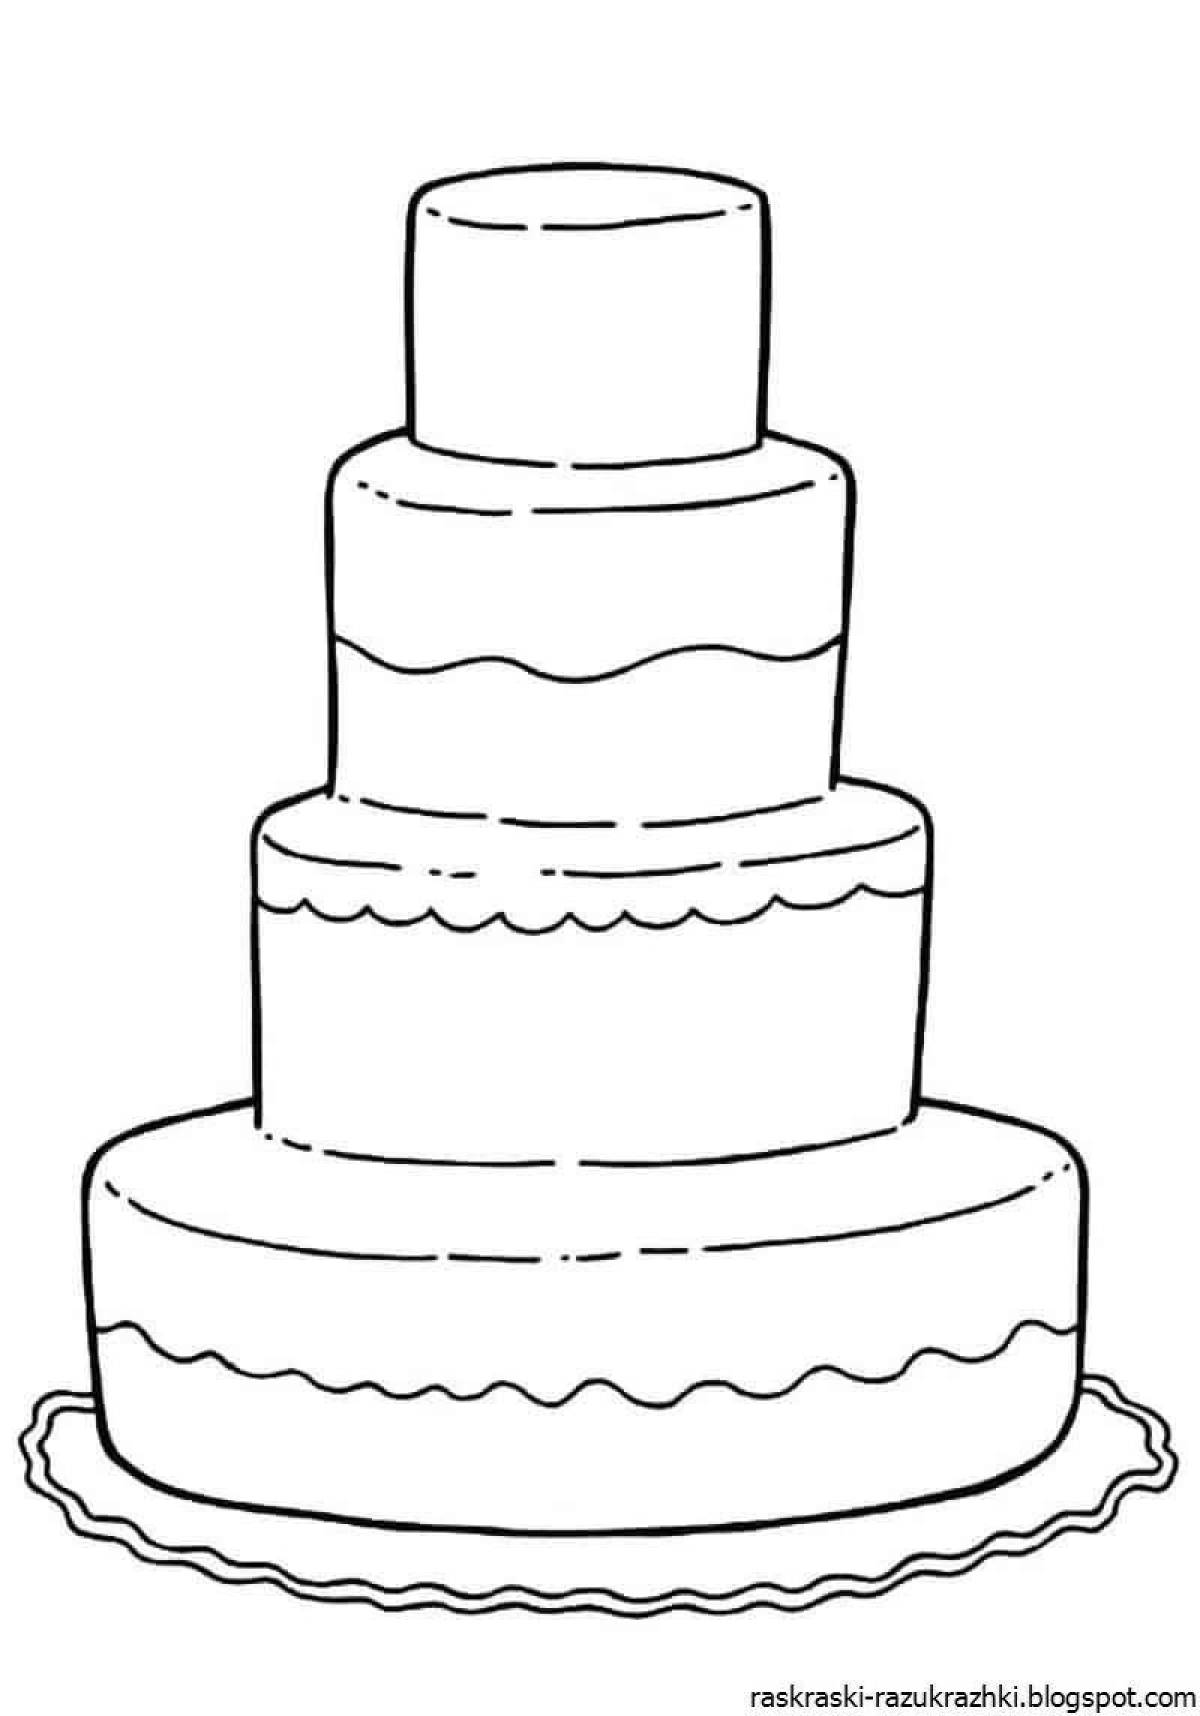 Gorgeous cake coloring book